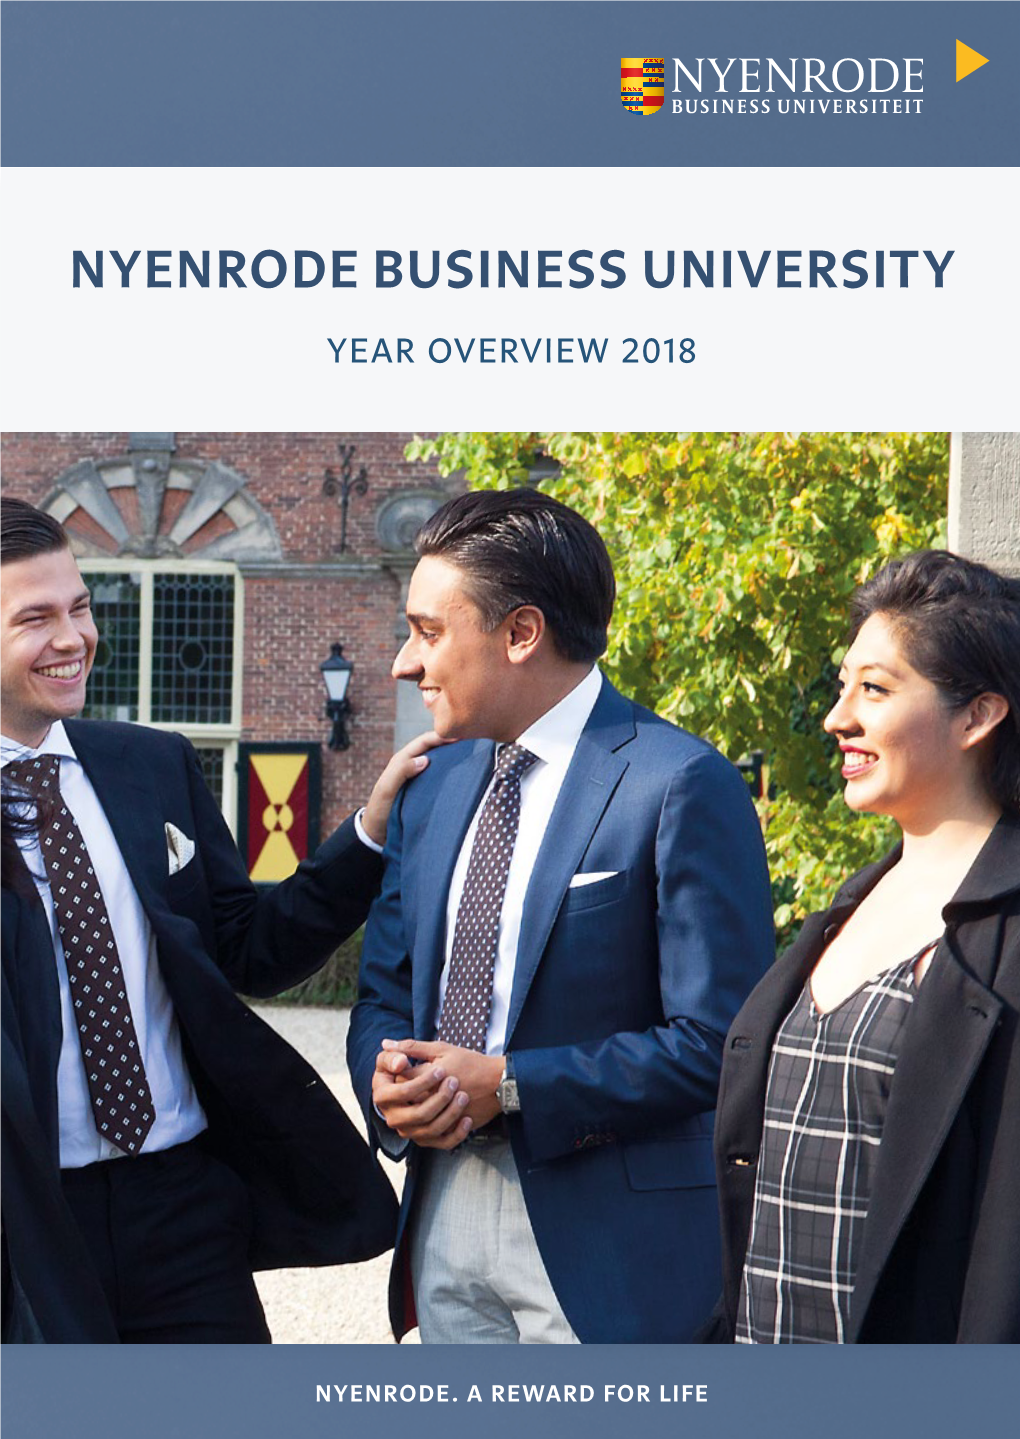 Nyenrode Business University Year Overview 2018 Nyenrode Business University Nyenrode| Business University Year Overview 2018